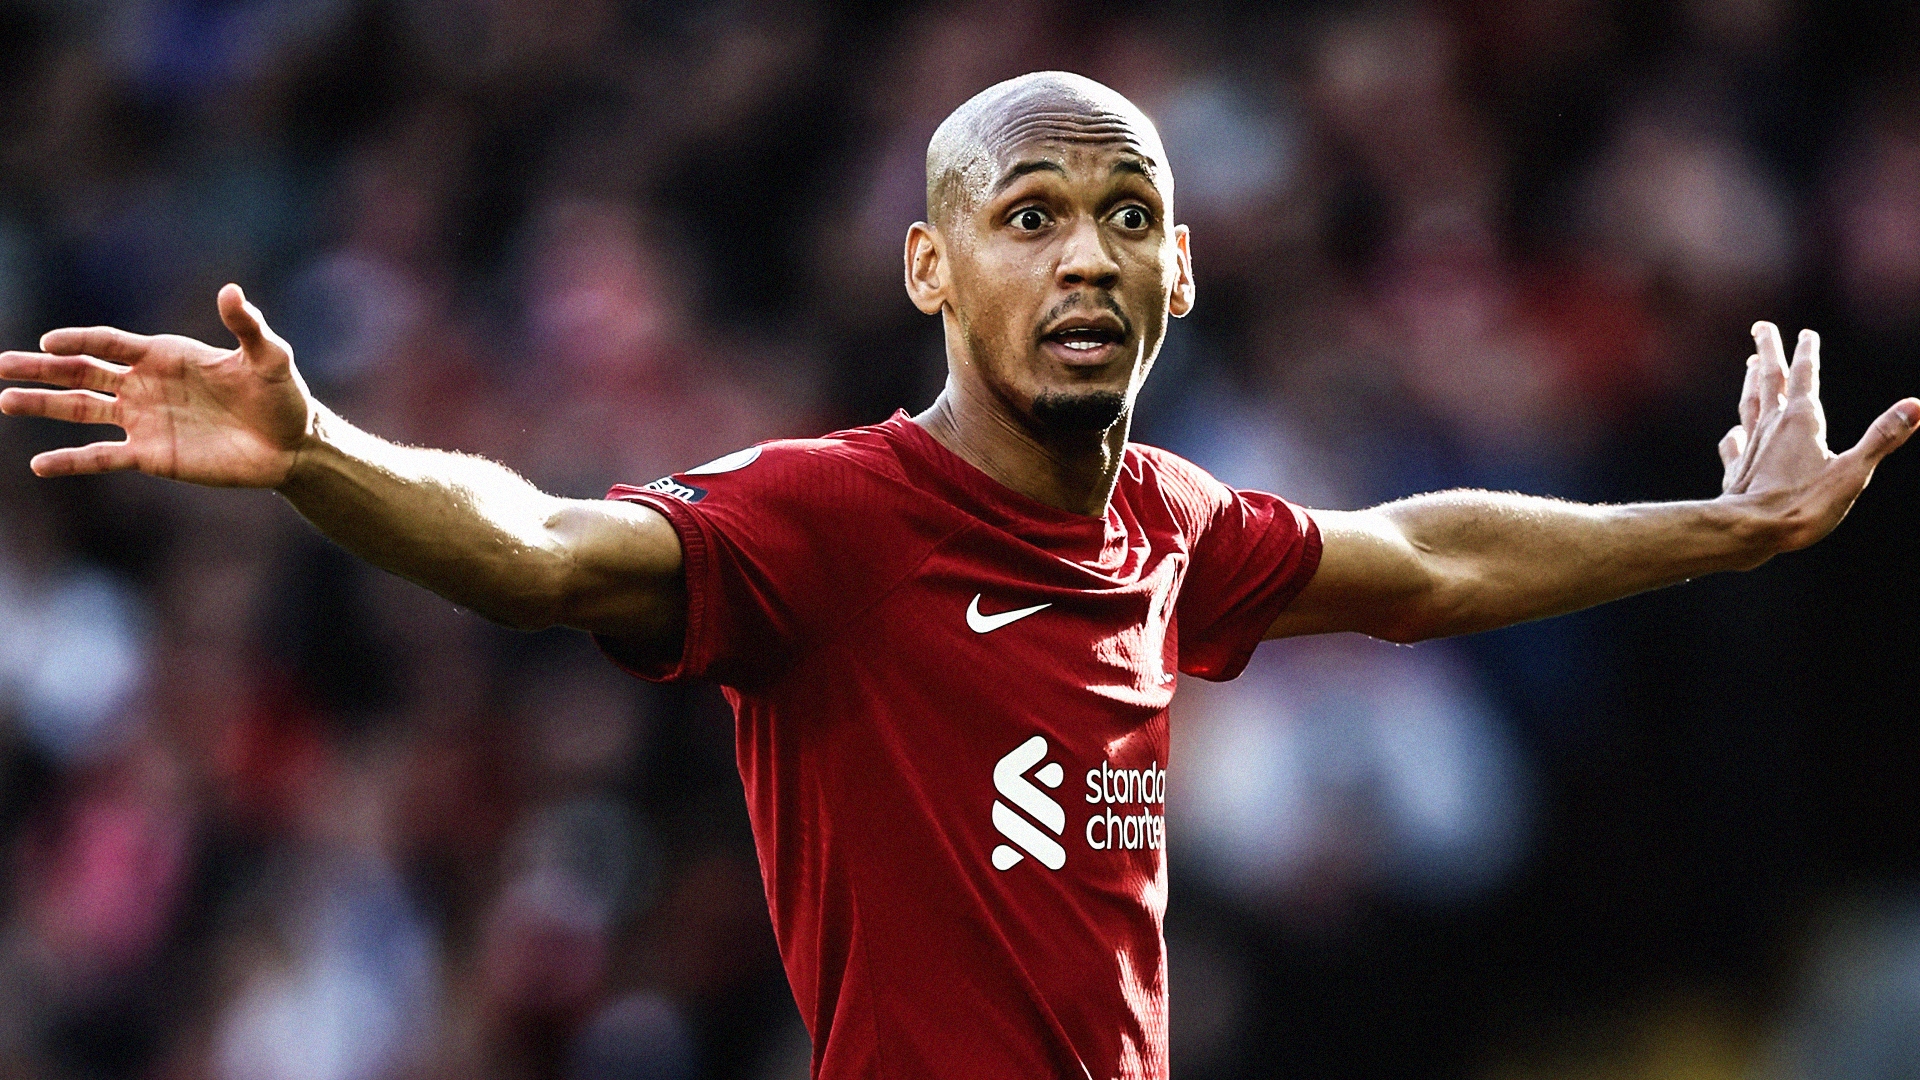 Liverpool lost without their lighthouse: Fabinho's struggles expose Klopp's midfield issues | Goal.com India